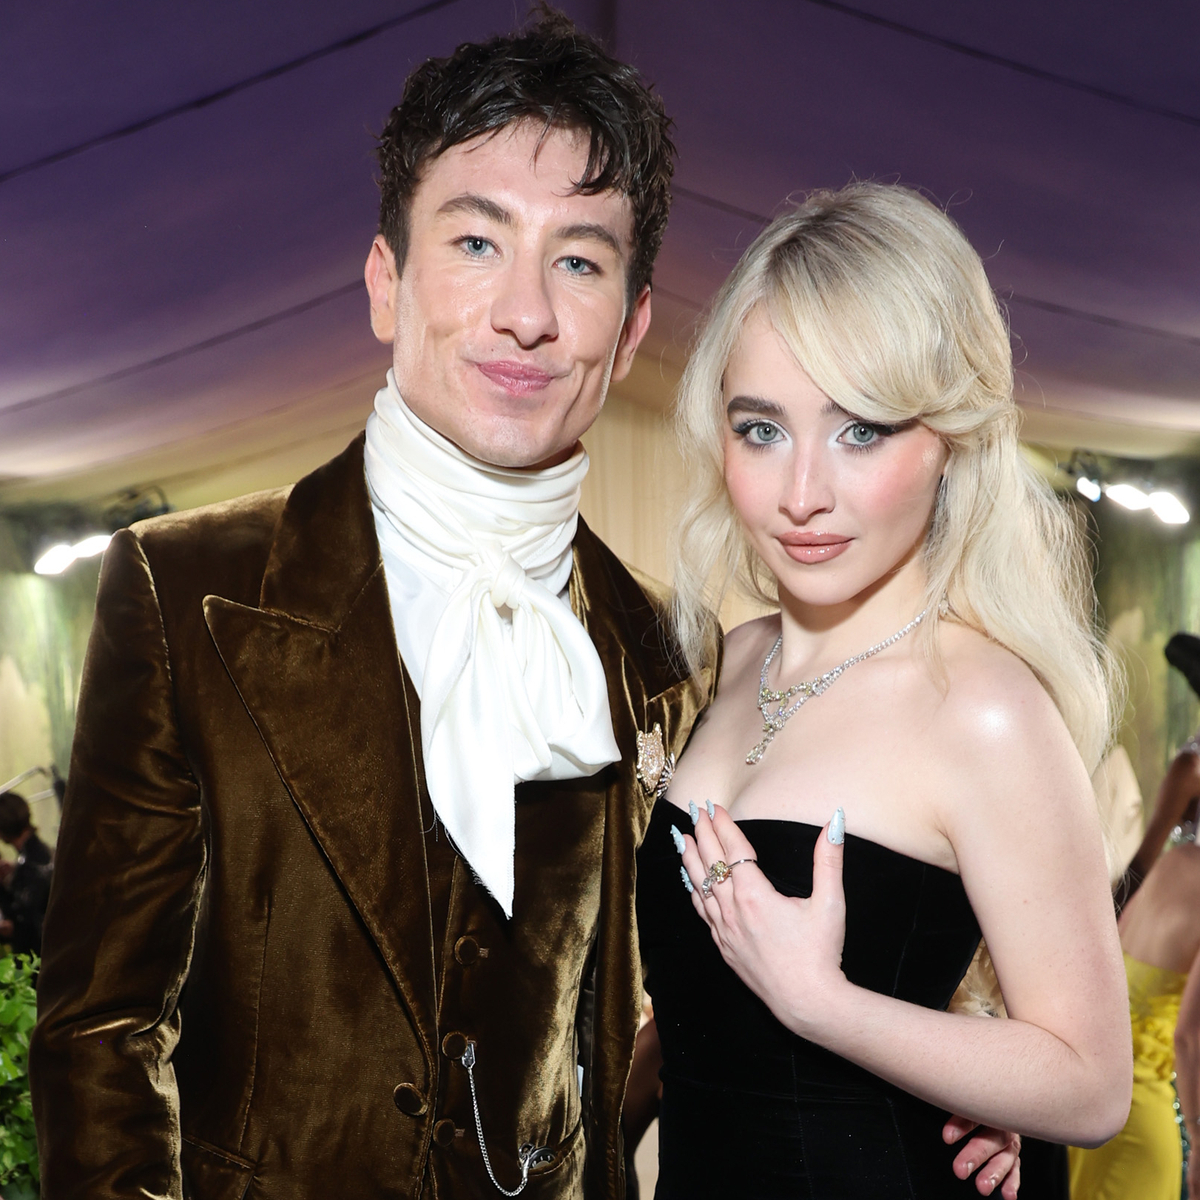 See Sabrina Carpenter & Barry Keoghan Pack on PDA in New Music Video